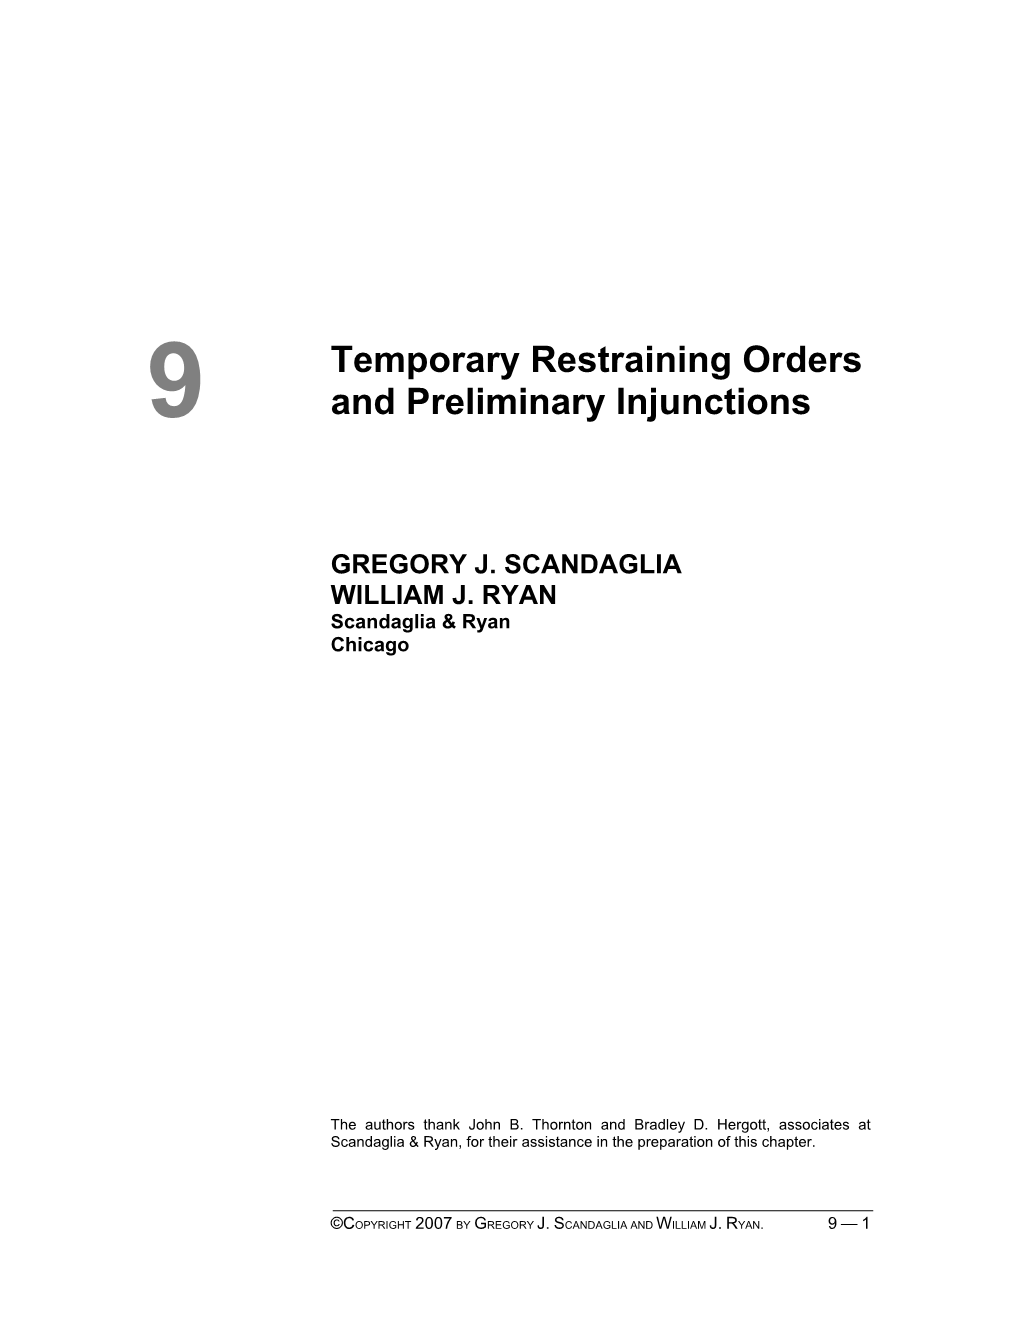 Temporary Restraining Orders and Preliminary Injunctions Defined 2